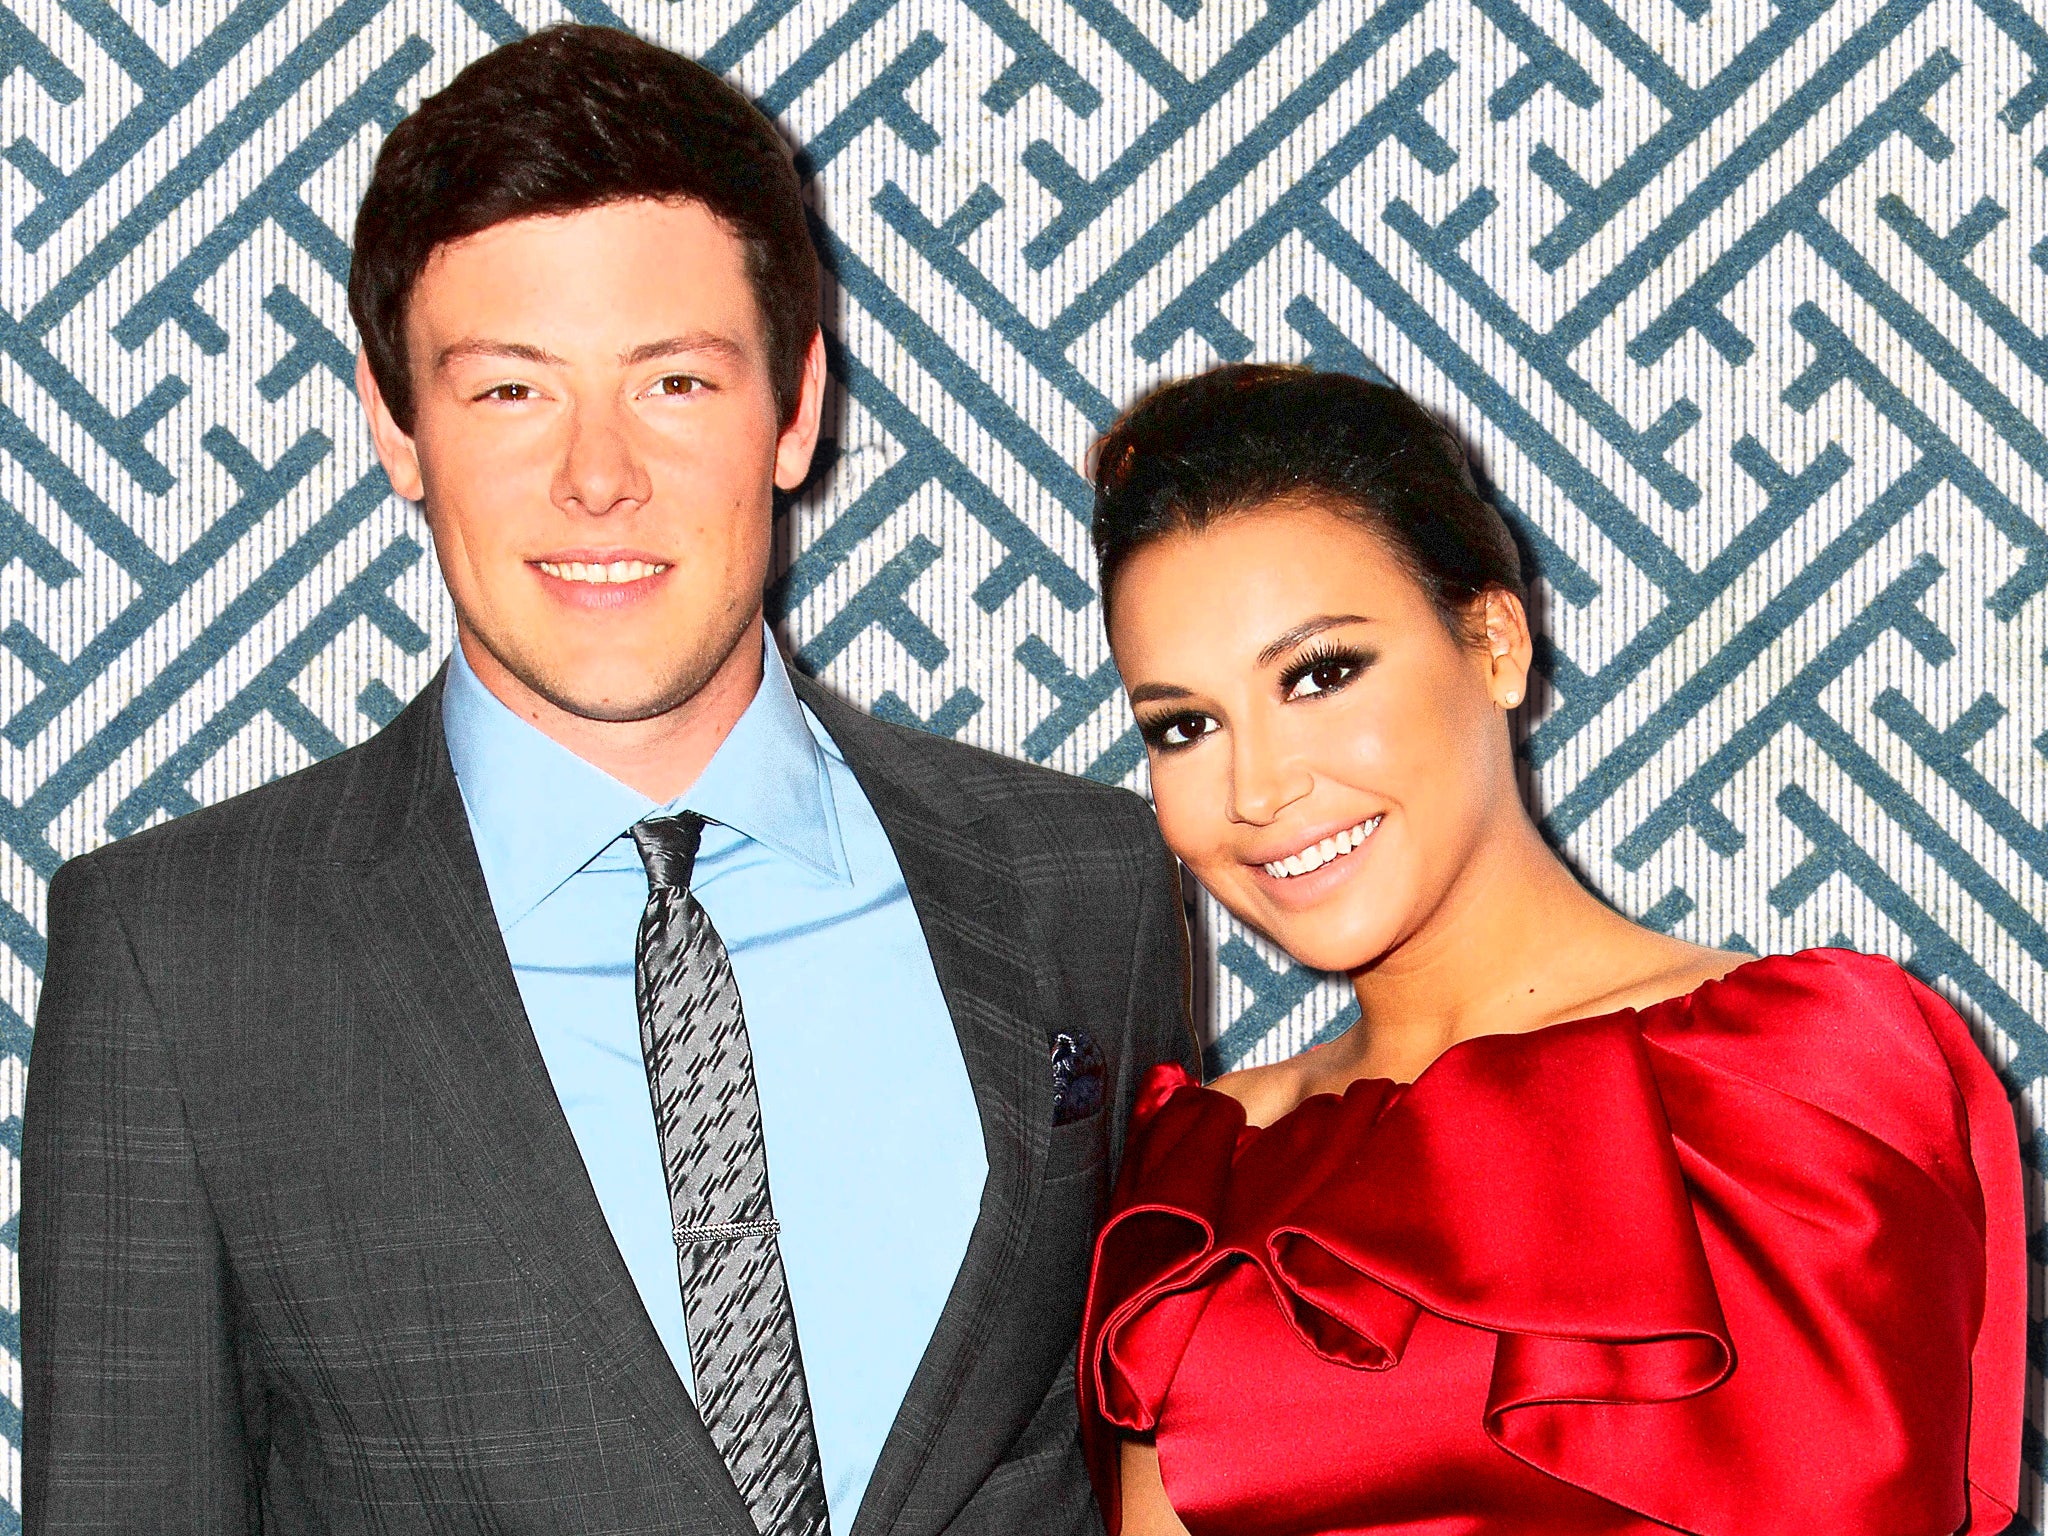 ‘Glee’ actors Cory Monteith and Naya Rivera in 2012. Their deaths are now explored in a new documentary